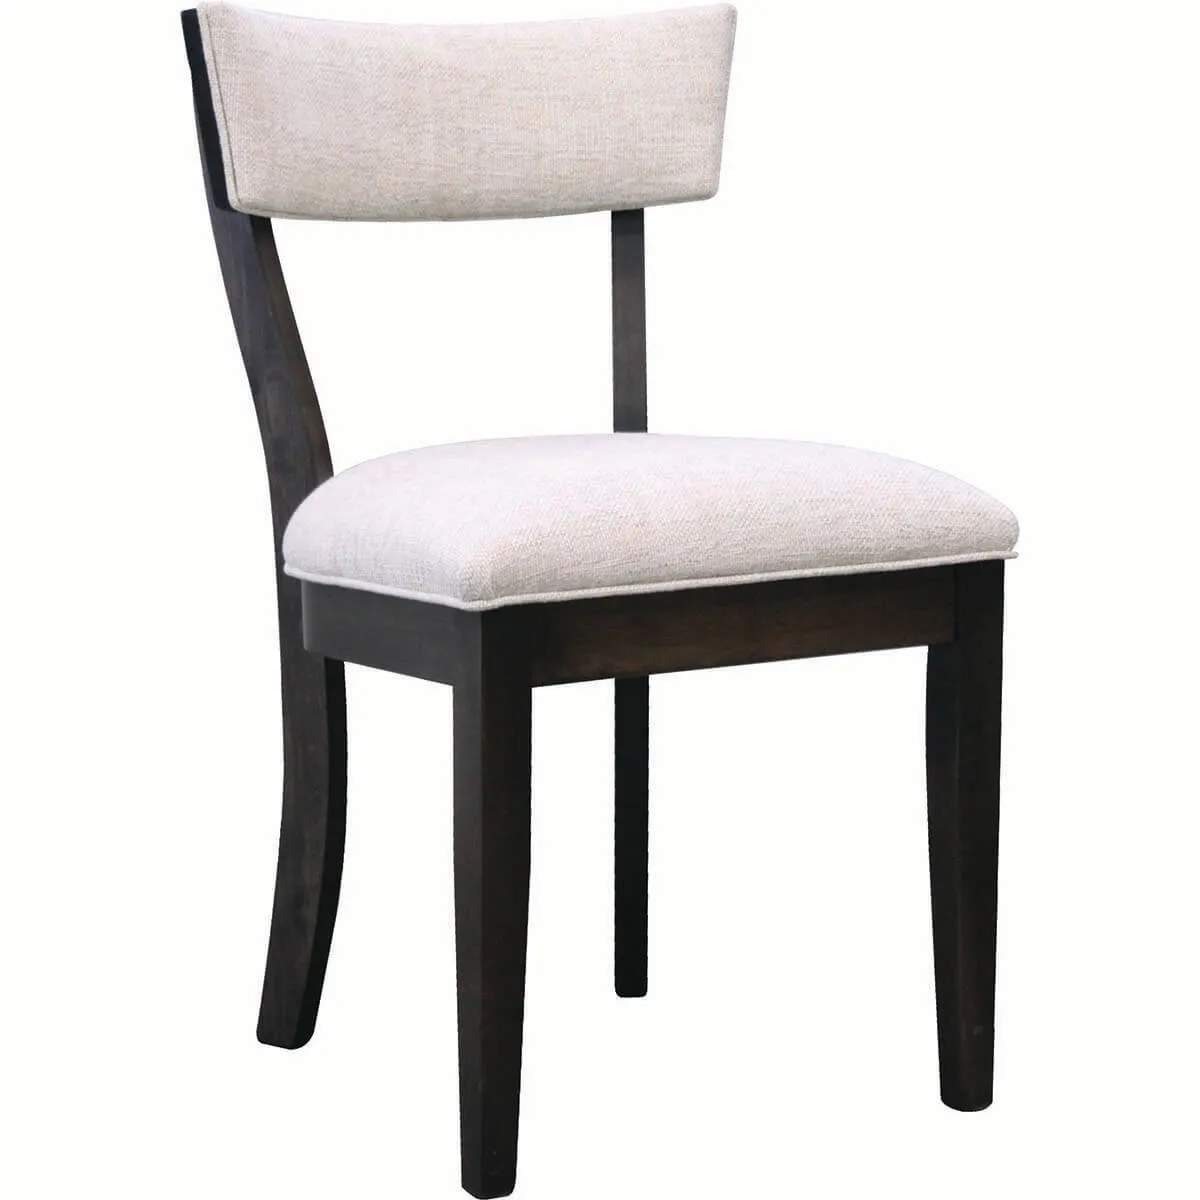 Greenville Dining Side Chair with Fabric